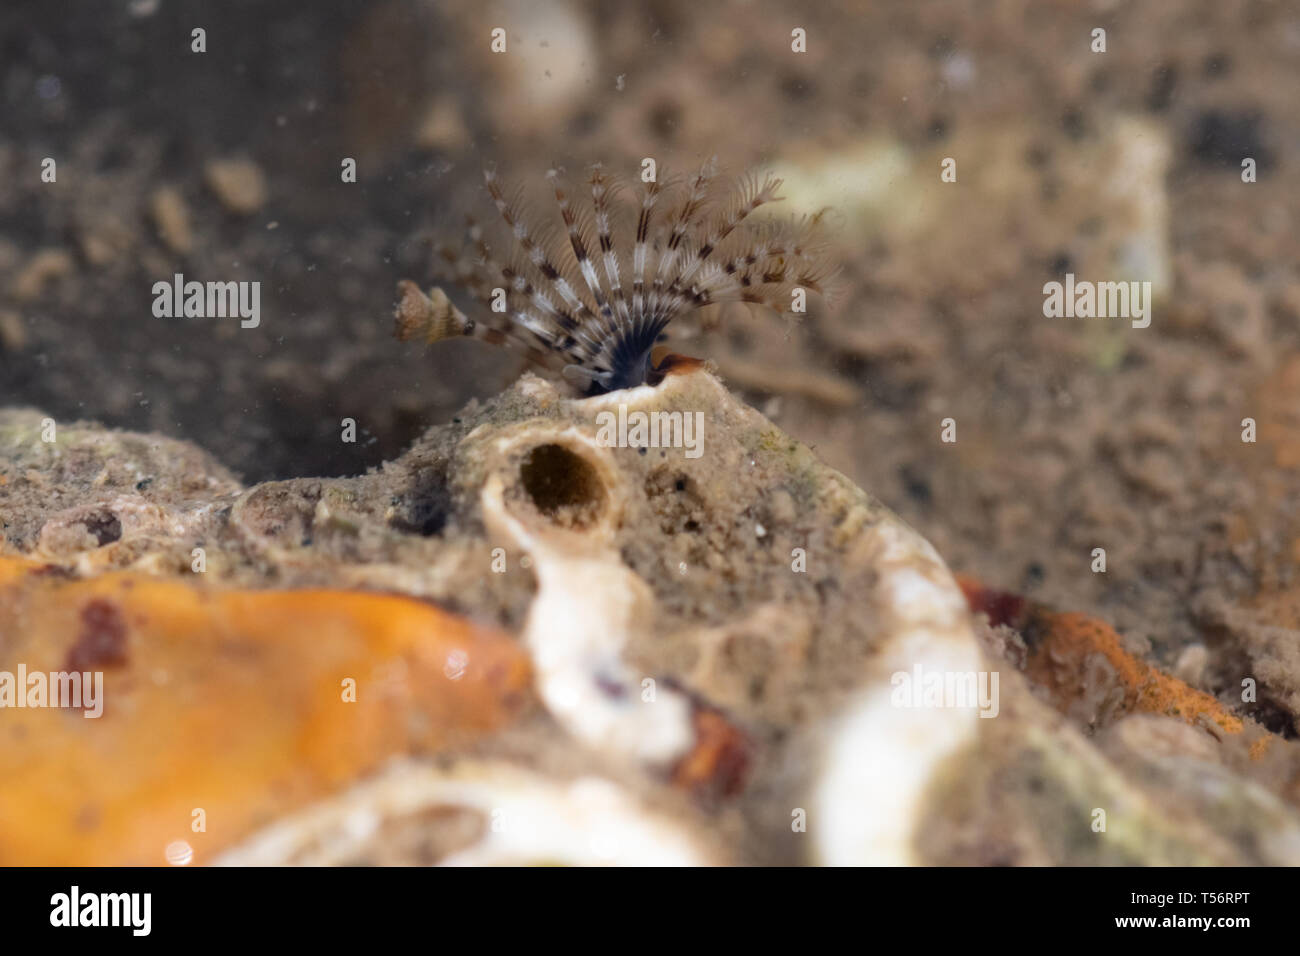 Calcareous tubeworm or fan worm showing feathery feeding tentacles in the intertidal zone at Hill Head near Fareham, UK. Marine wildlife. Stock Photo